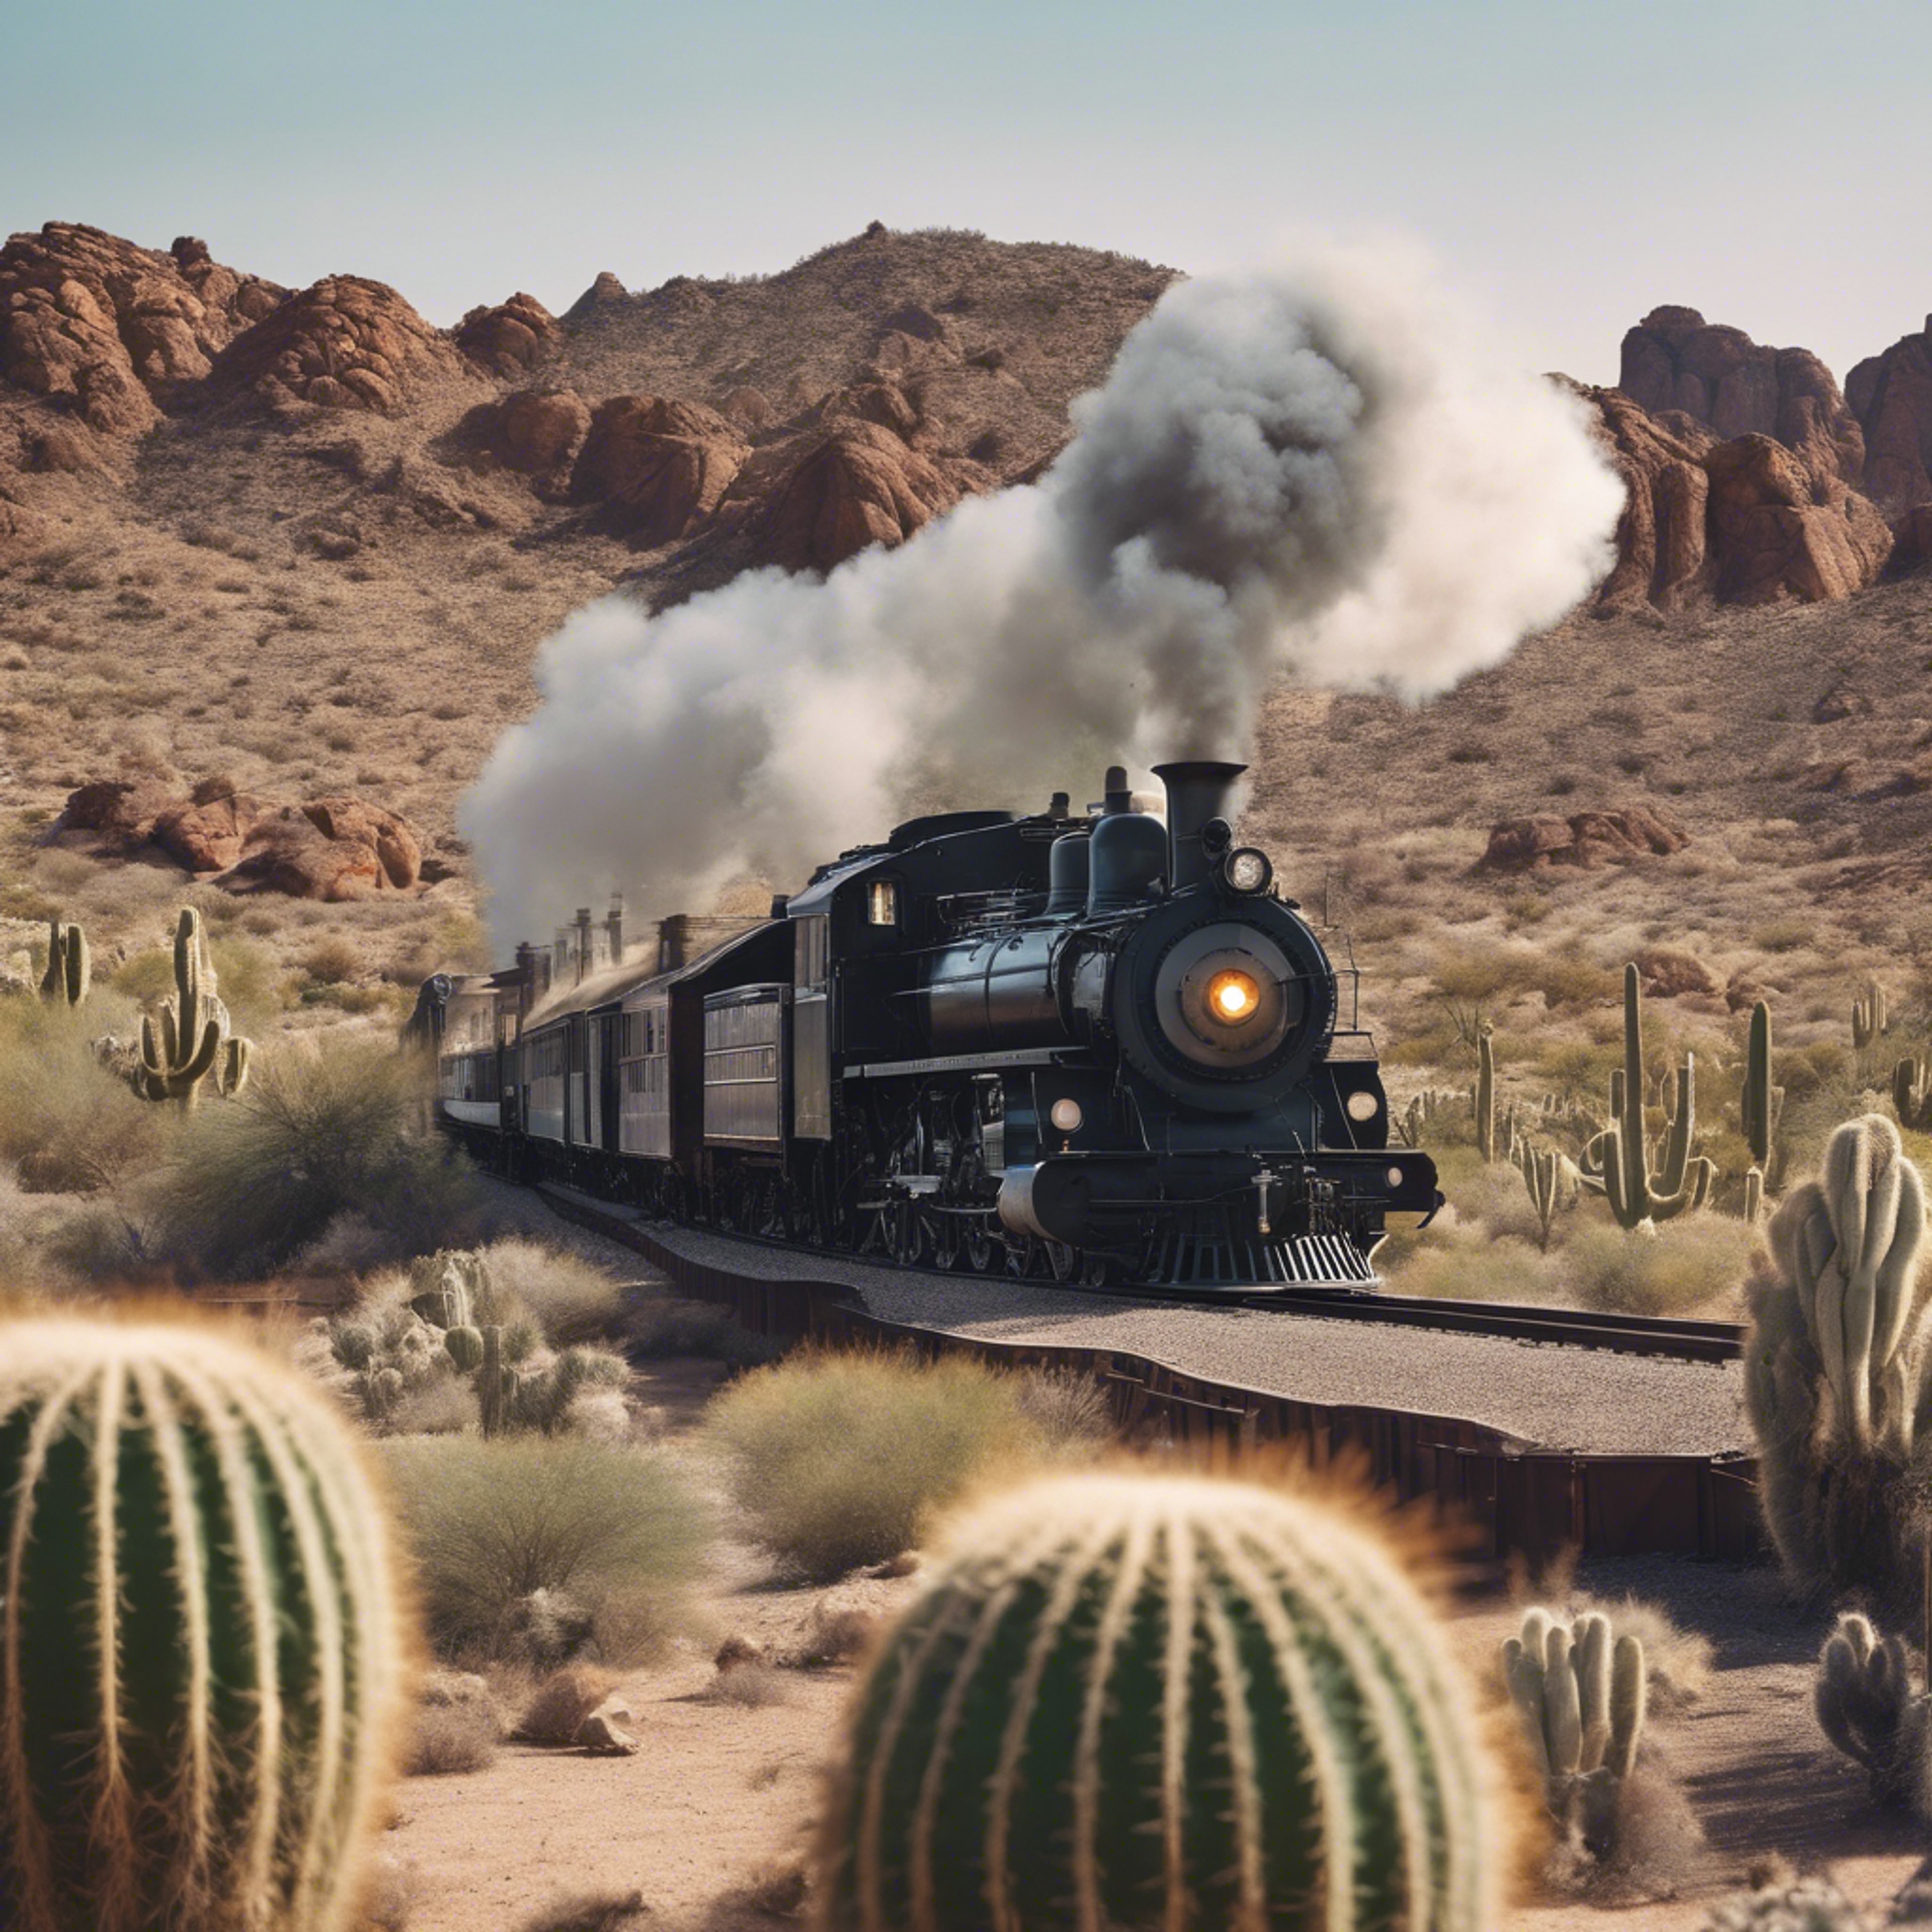 A locomotive steam train rushing across the barren Western landscape surrounded by towering cacti. Hình nền[f5a4930d44454dd795f5]